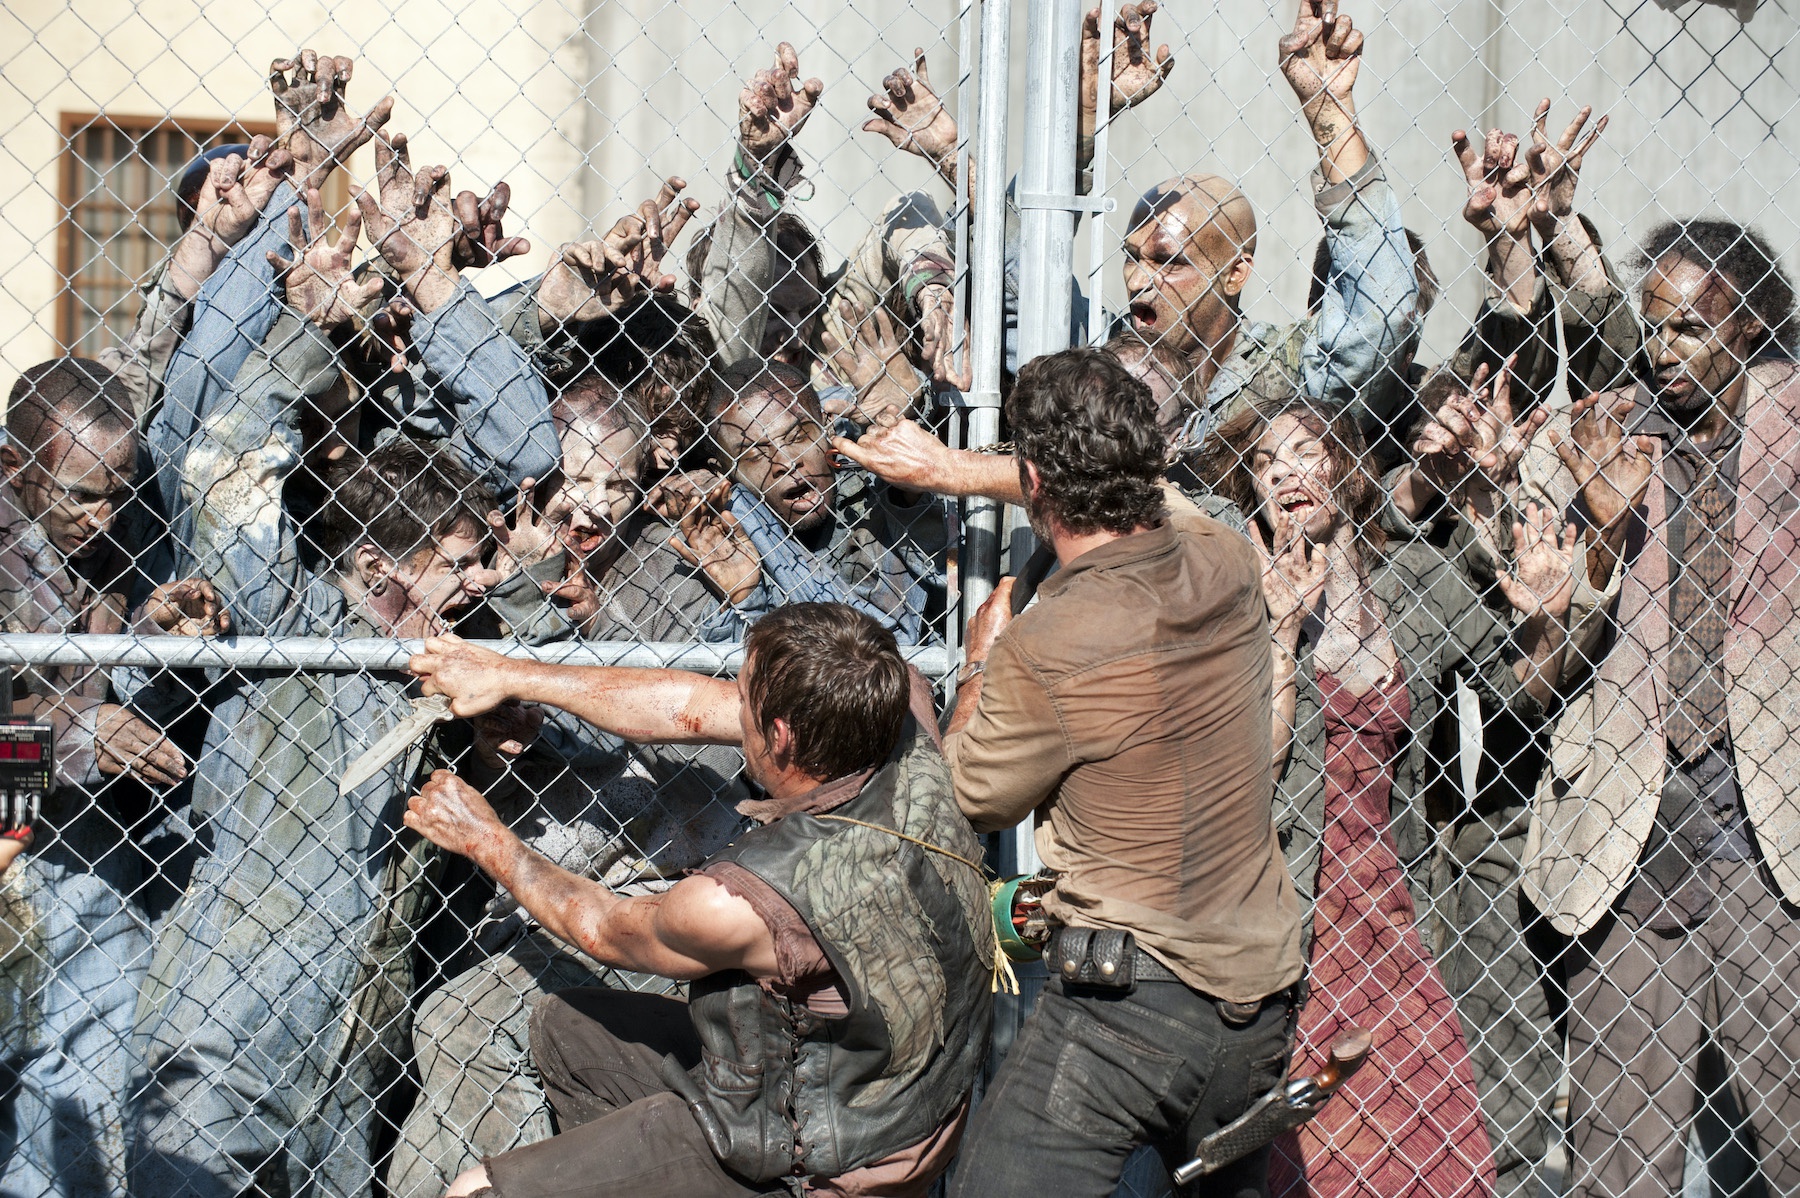 How to Get Cast on ‘The Walking Dead’